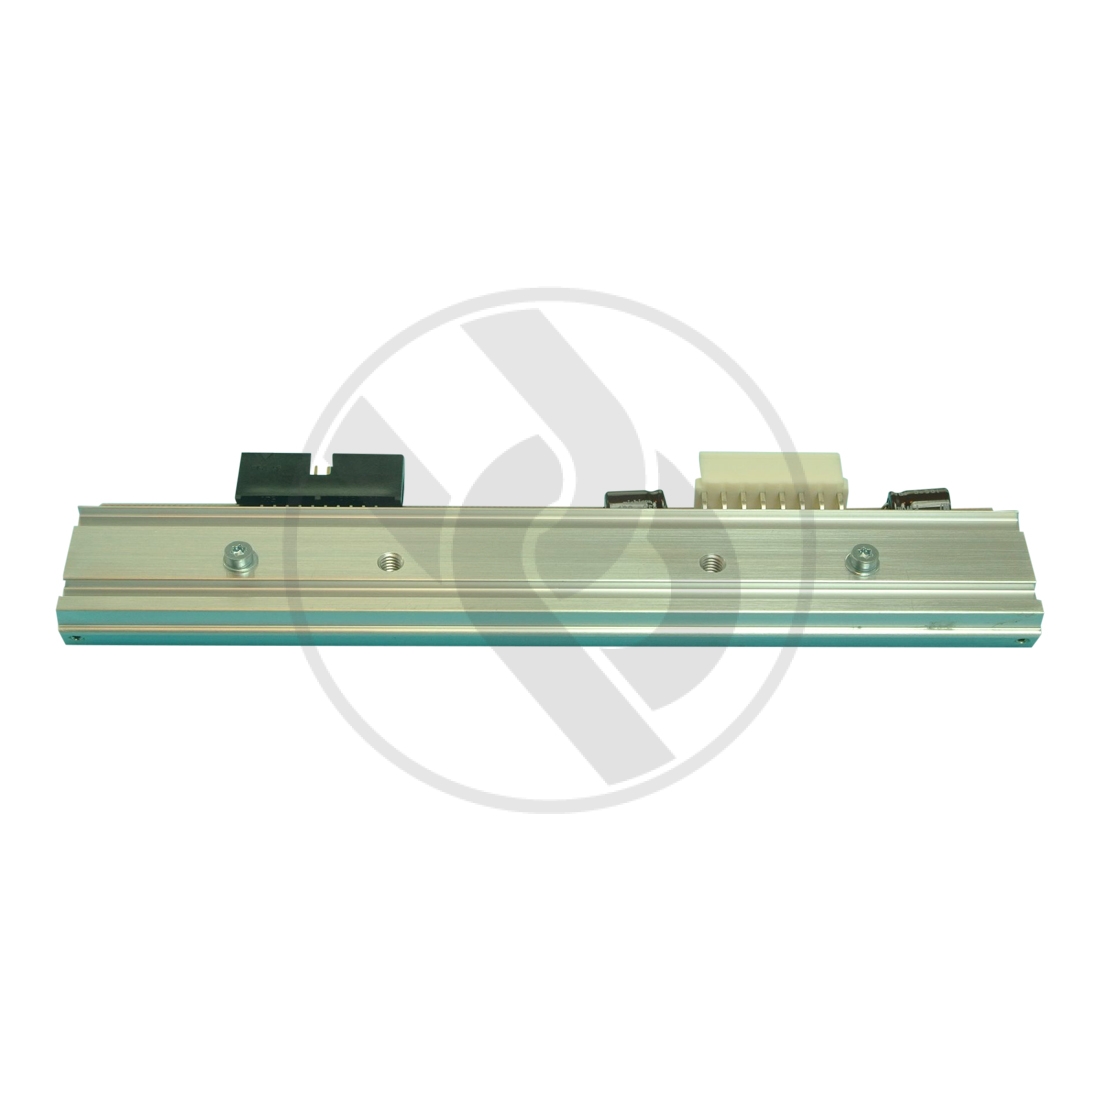 Thermal printhead, A100169, for Avery/Novexx A100169